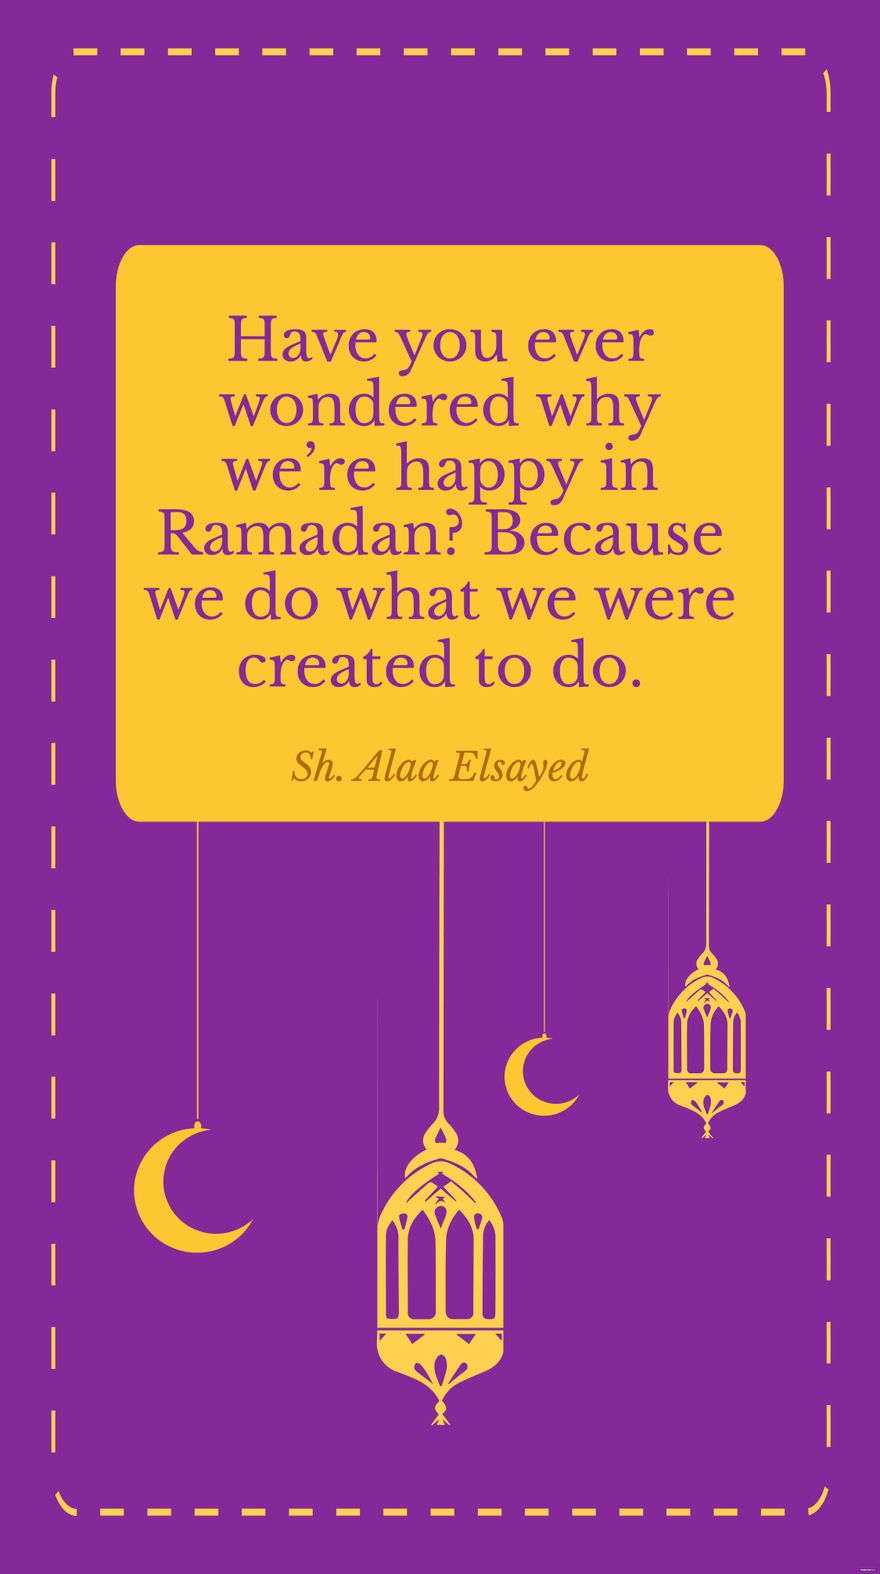 Free Sh. Alaa Elsayed - Have you ever wondered why we’re happy in Ramadan? Because we do what we were created to do. in JPG